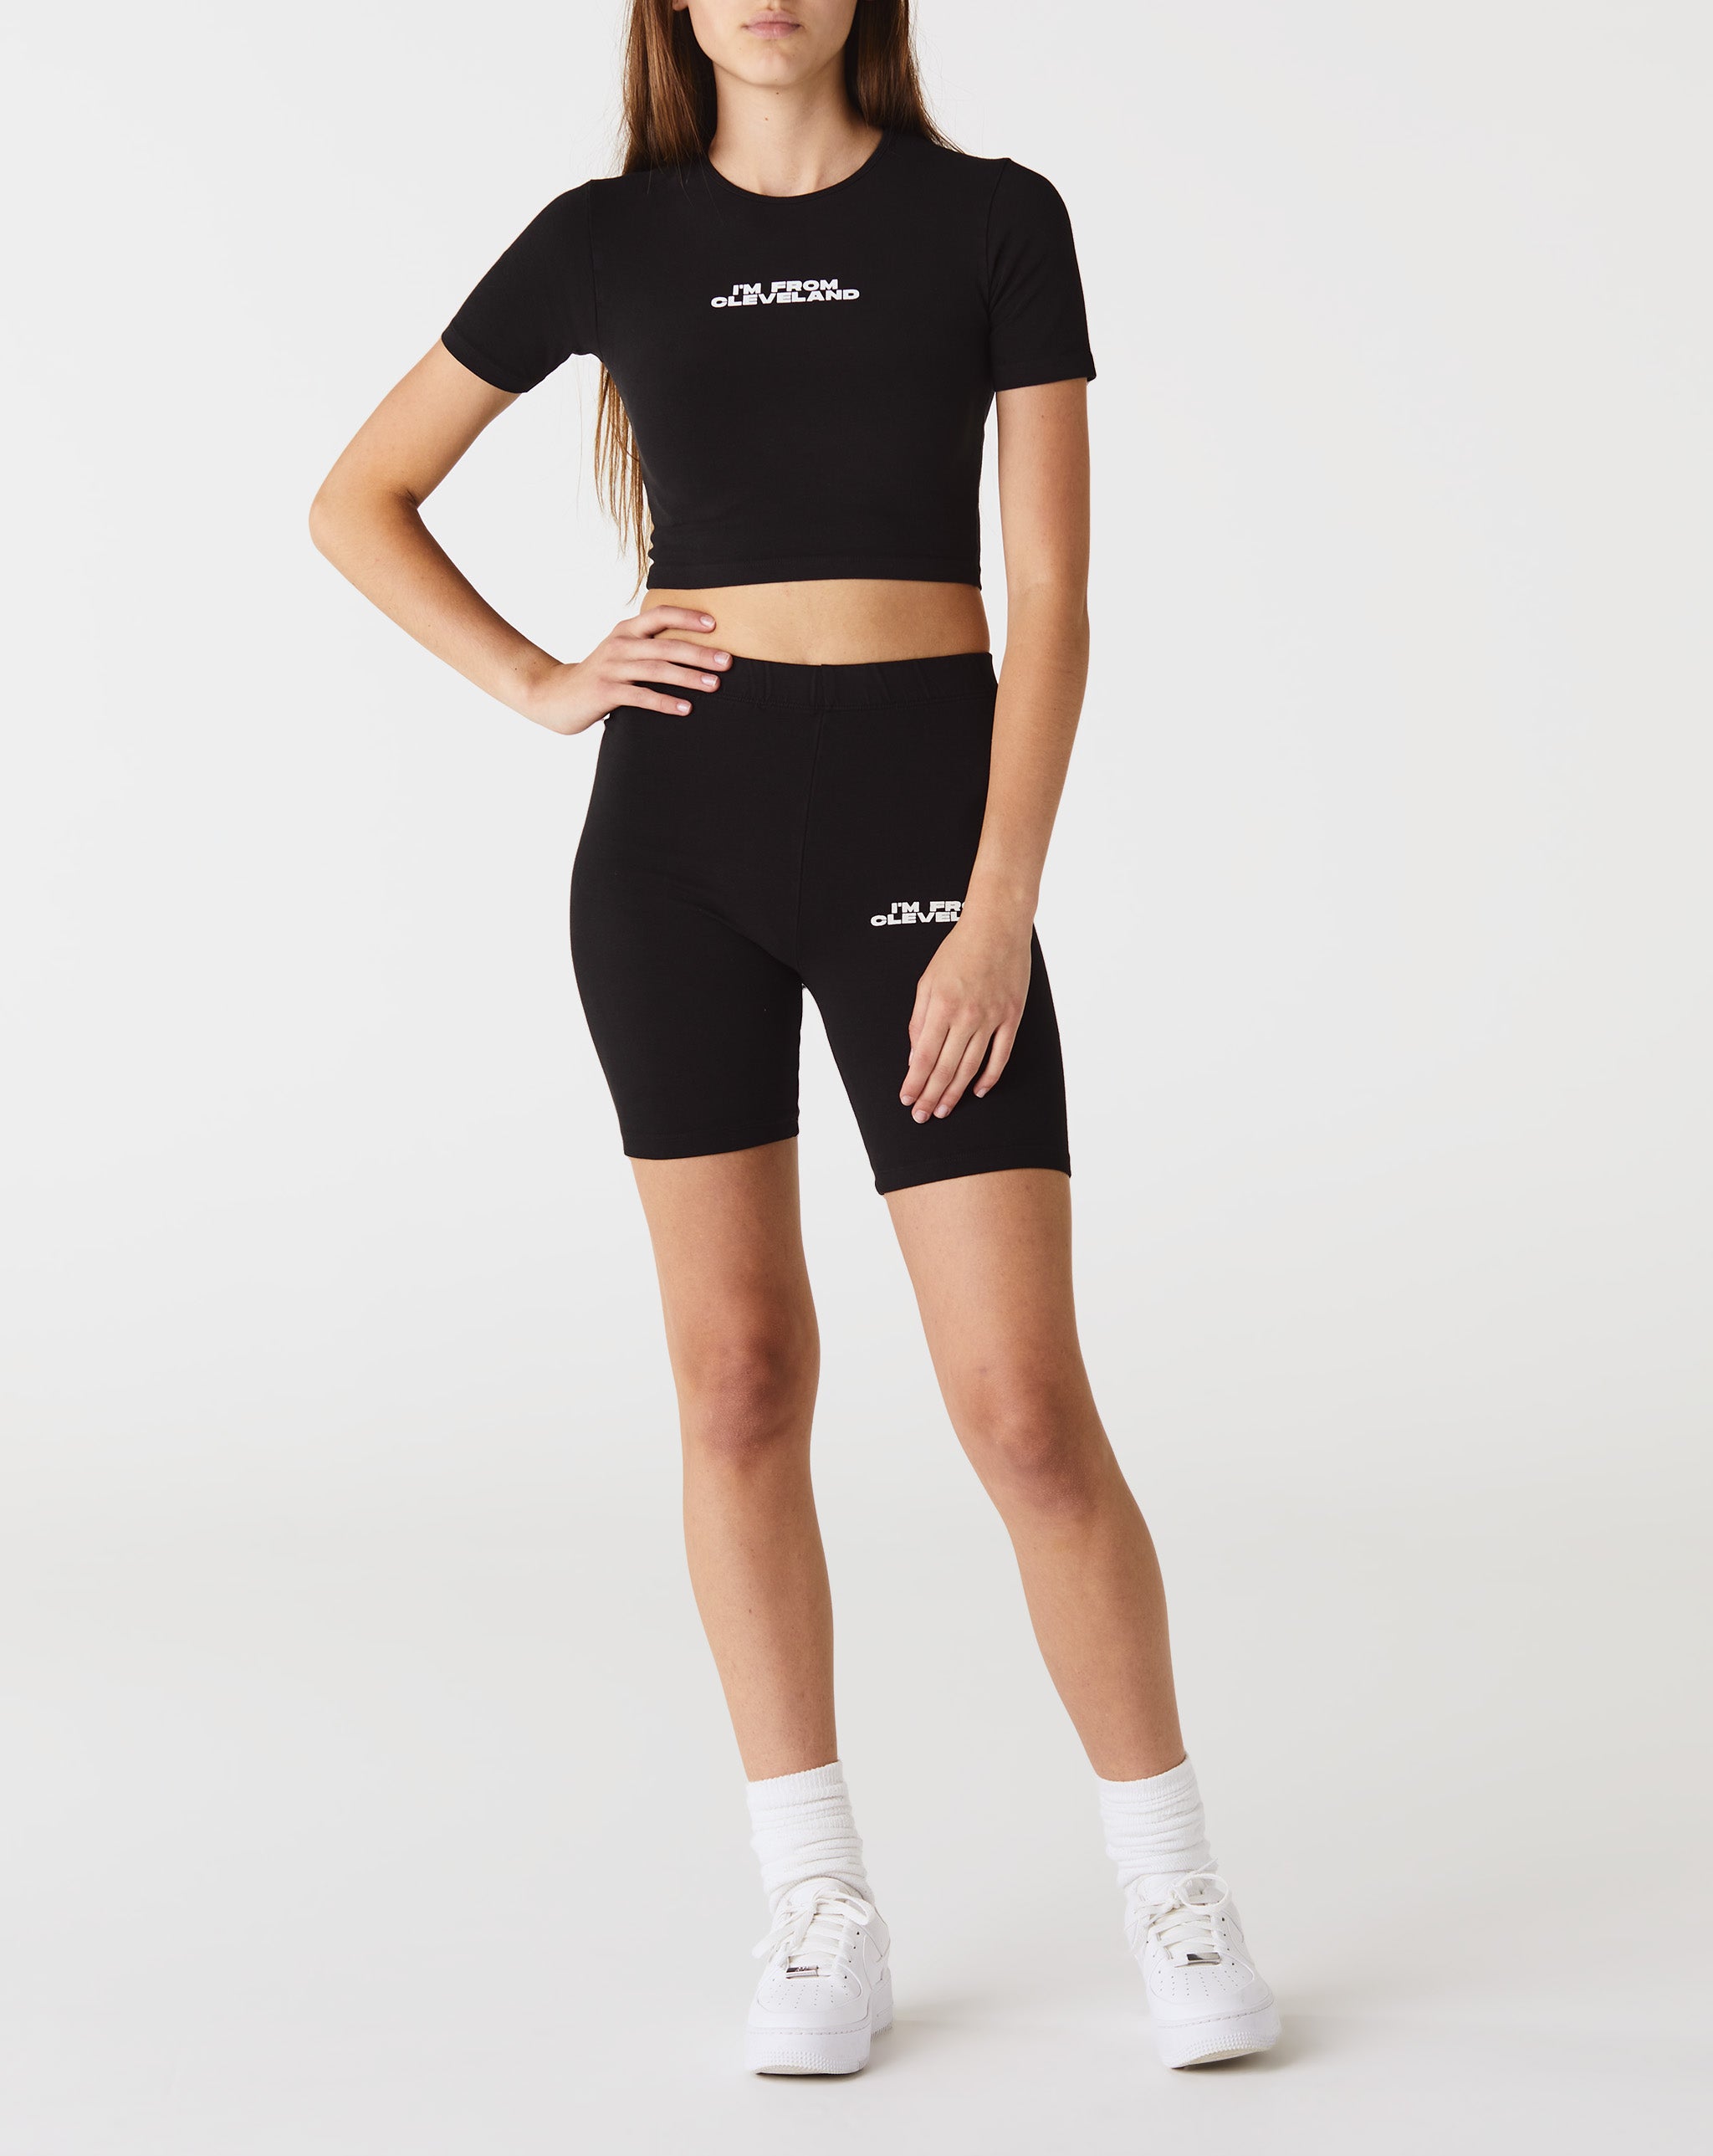 Contrast High x Cheap Erlebniswelt-fliegenfischen Jordan outlet Contrast High x Cheap Erlebniswelt-fliegenfischen Jordan outlet Women's Cropped T-Shirt  - Cheap Erlebniswelt-fliegenfischen Jordan outlet